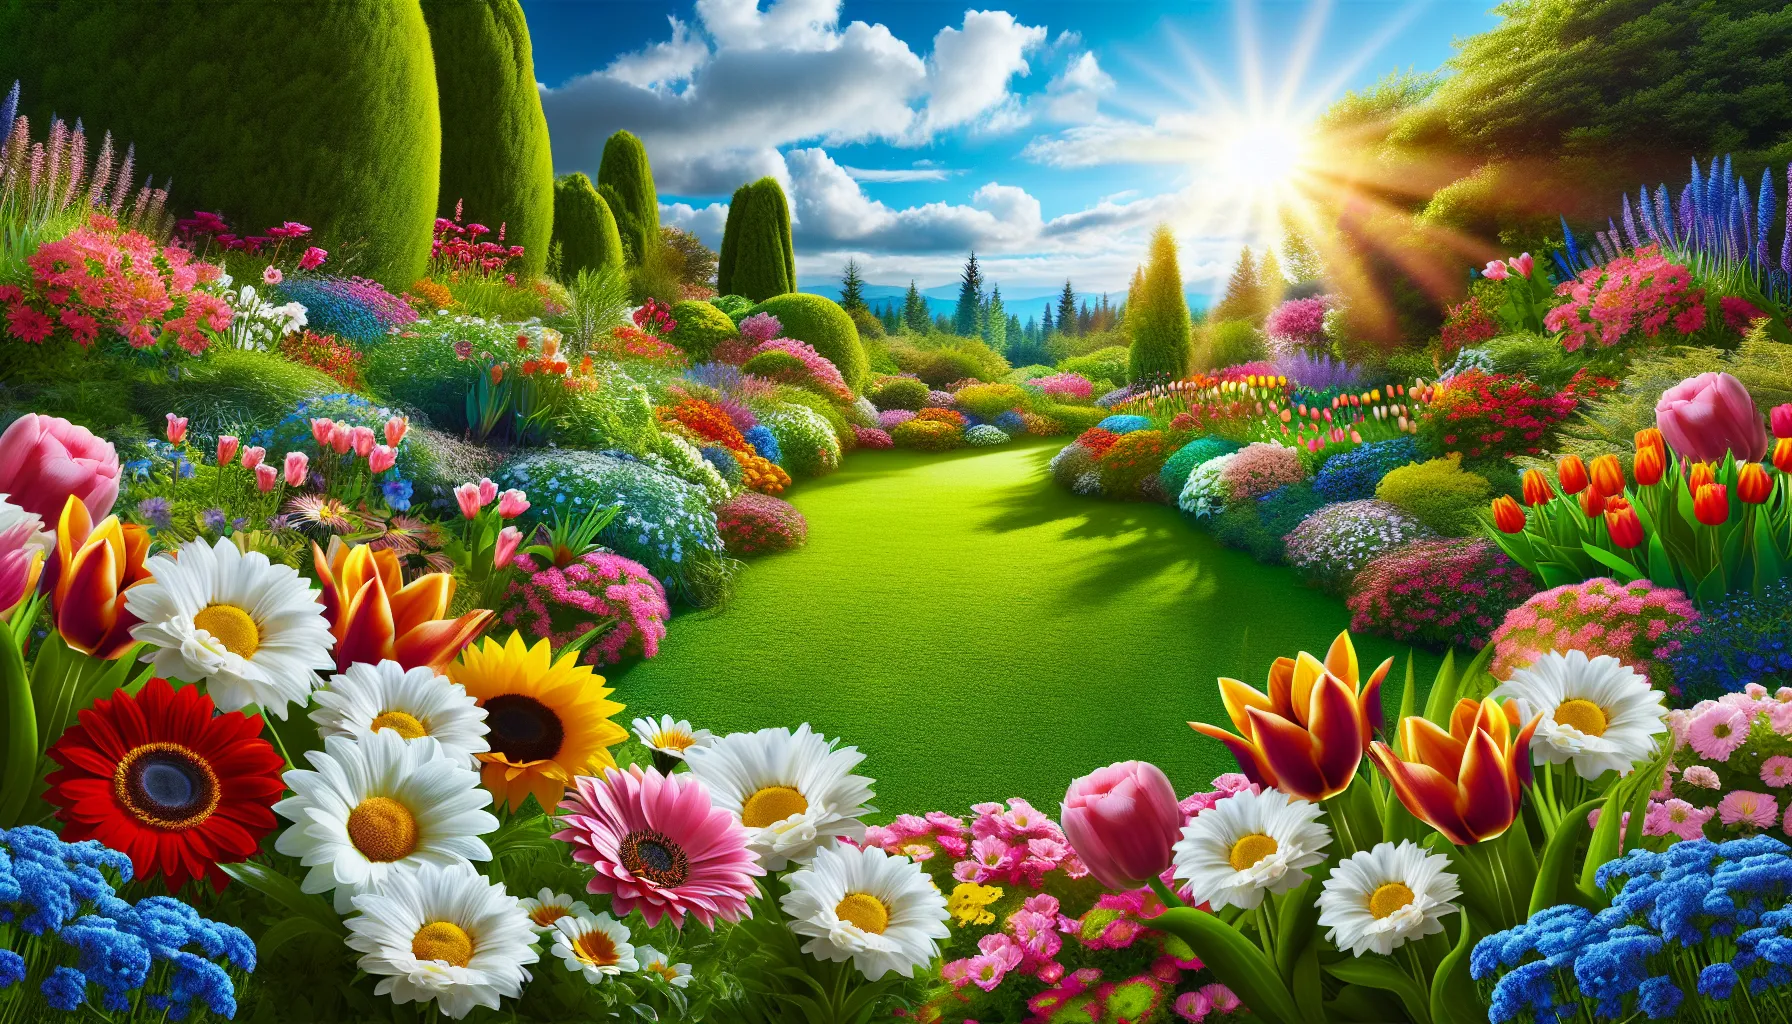 A vibrant and well-manicured garden bursting with colorful yard flowers under a sunny sky.